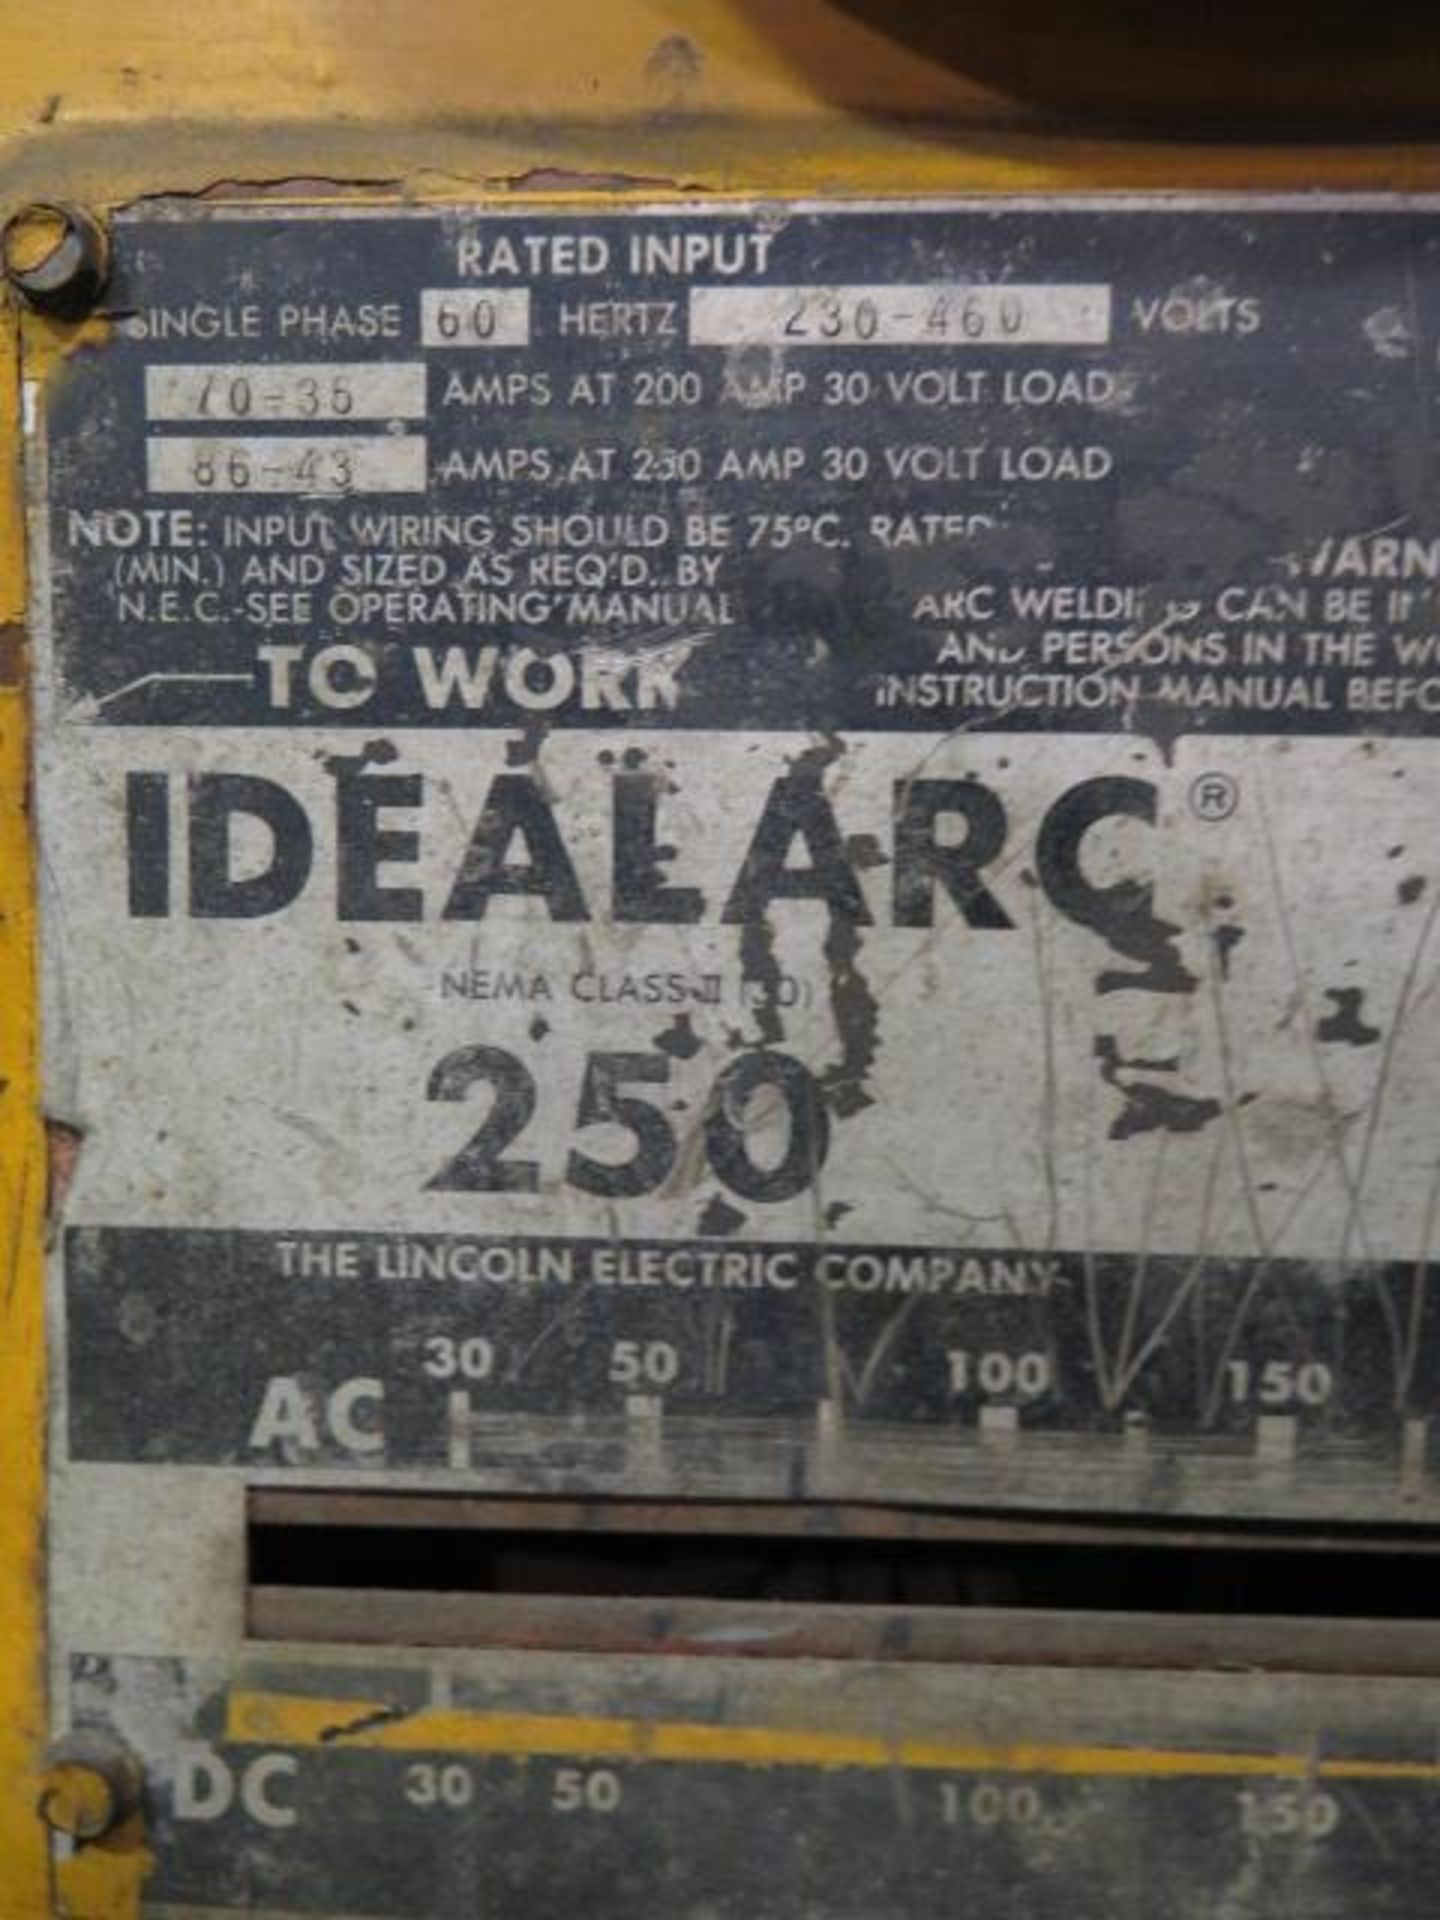 Lincoln Idealarc 250 Arc Welding Power Source (SOLD AS-IS - NO WARRANTY) - Image 5 of 10